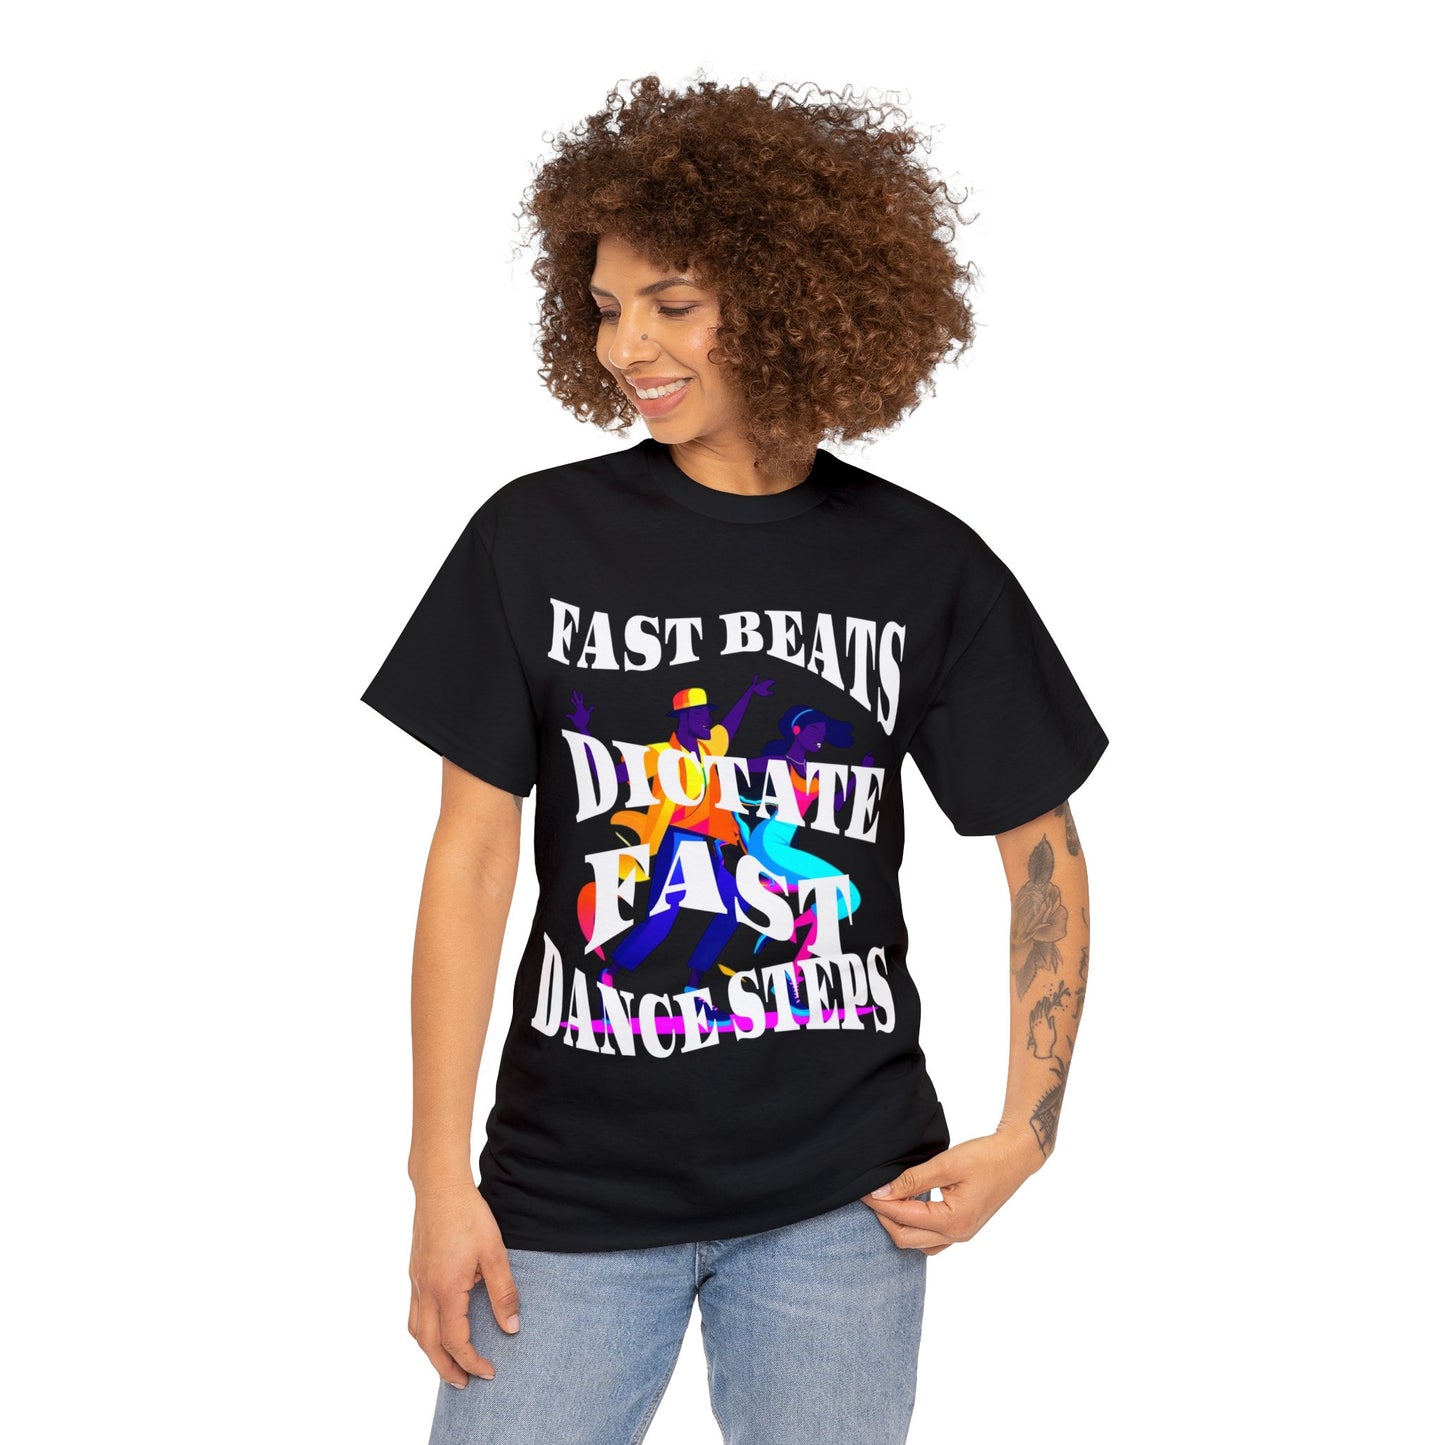 Unisex Heavy Cotton Tee, Fast Beats Dictate Fast Dance Steps (white font)